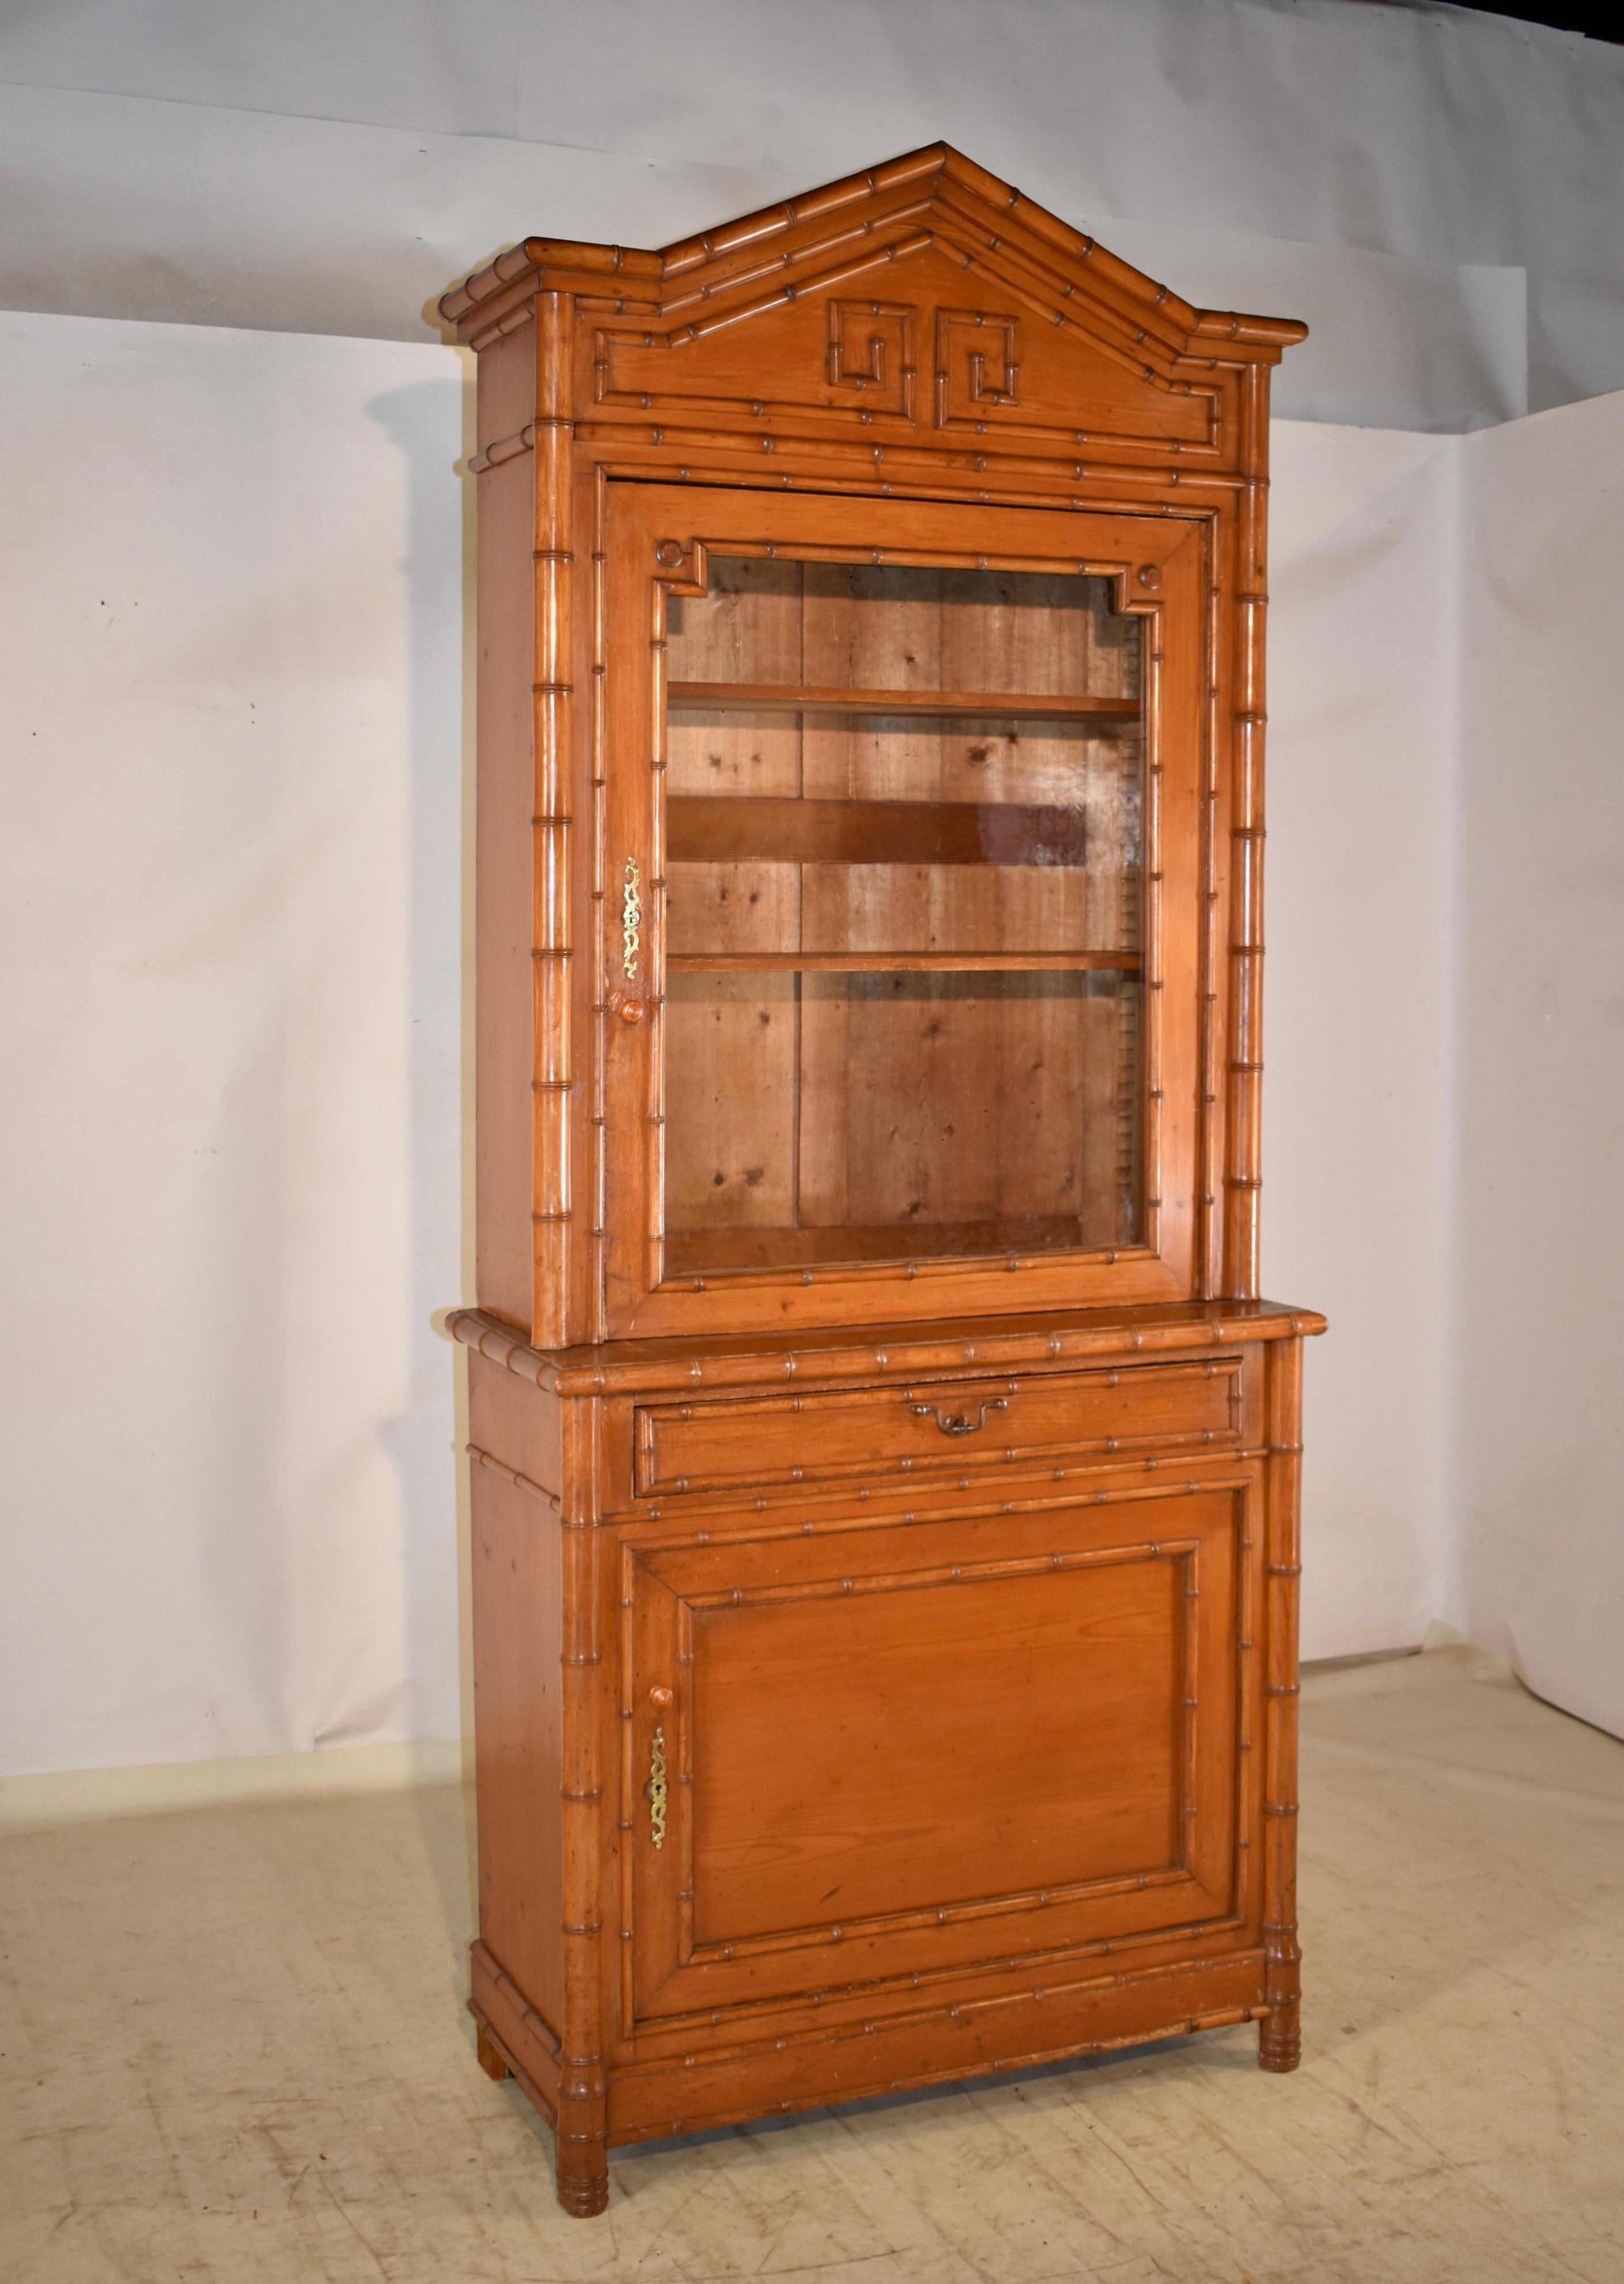 19th century faux bamboo cabinet from France.  The cabinet is made from pine, and has faux bamboo molding made from cherry. The top is arched and is decorated with faux bamboo molded trim, which accents the design of the cabinet and adds interest. 